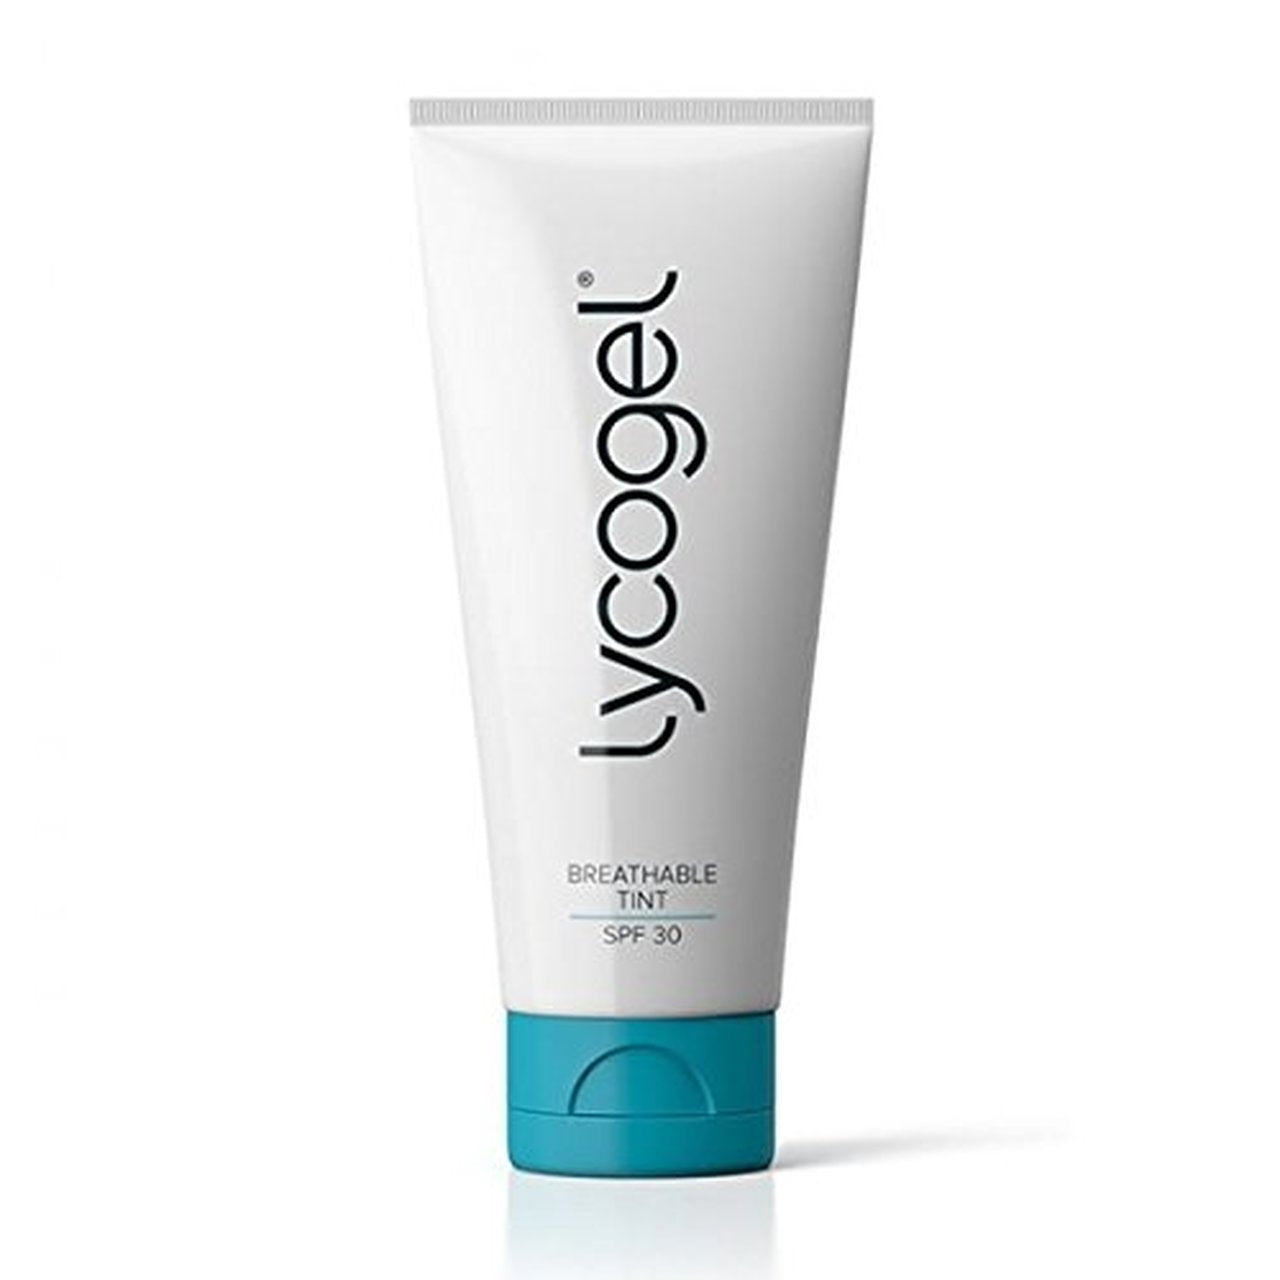 https://sophiescosmetics.com/products/lycogel-breathable-tint-spf-30-1-oz